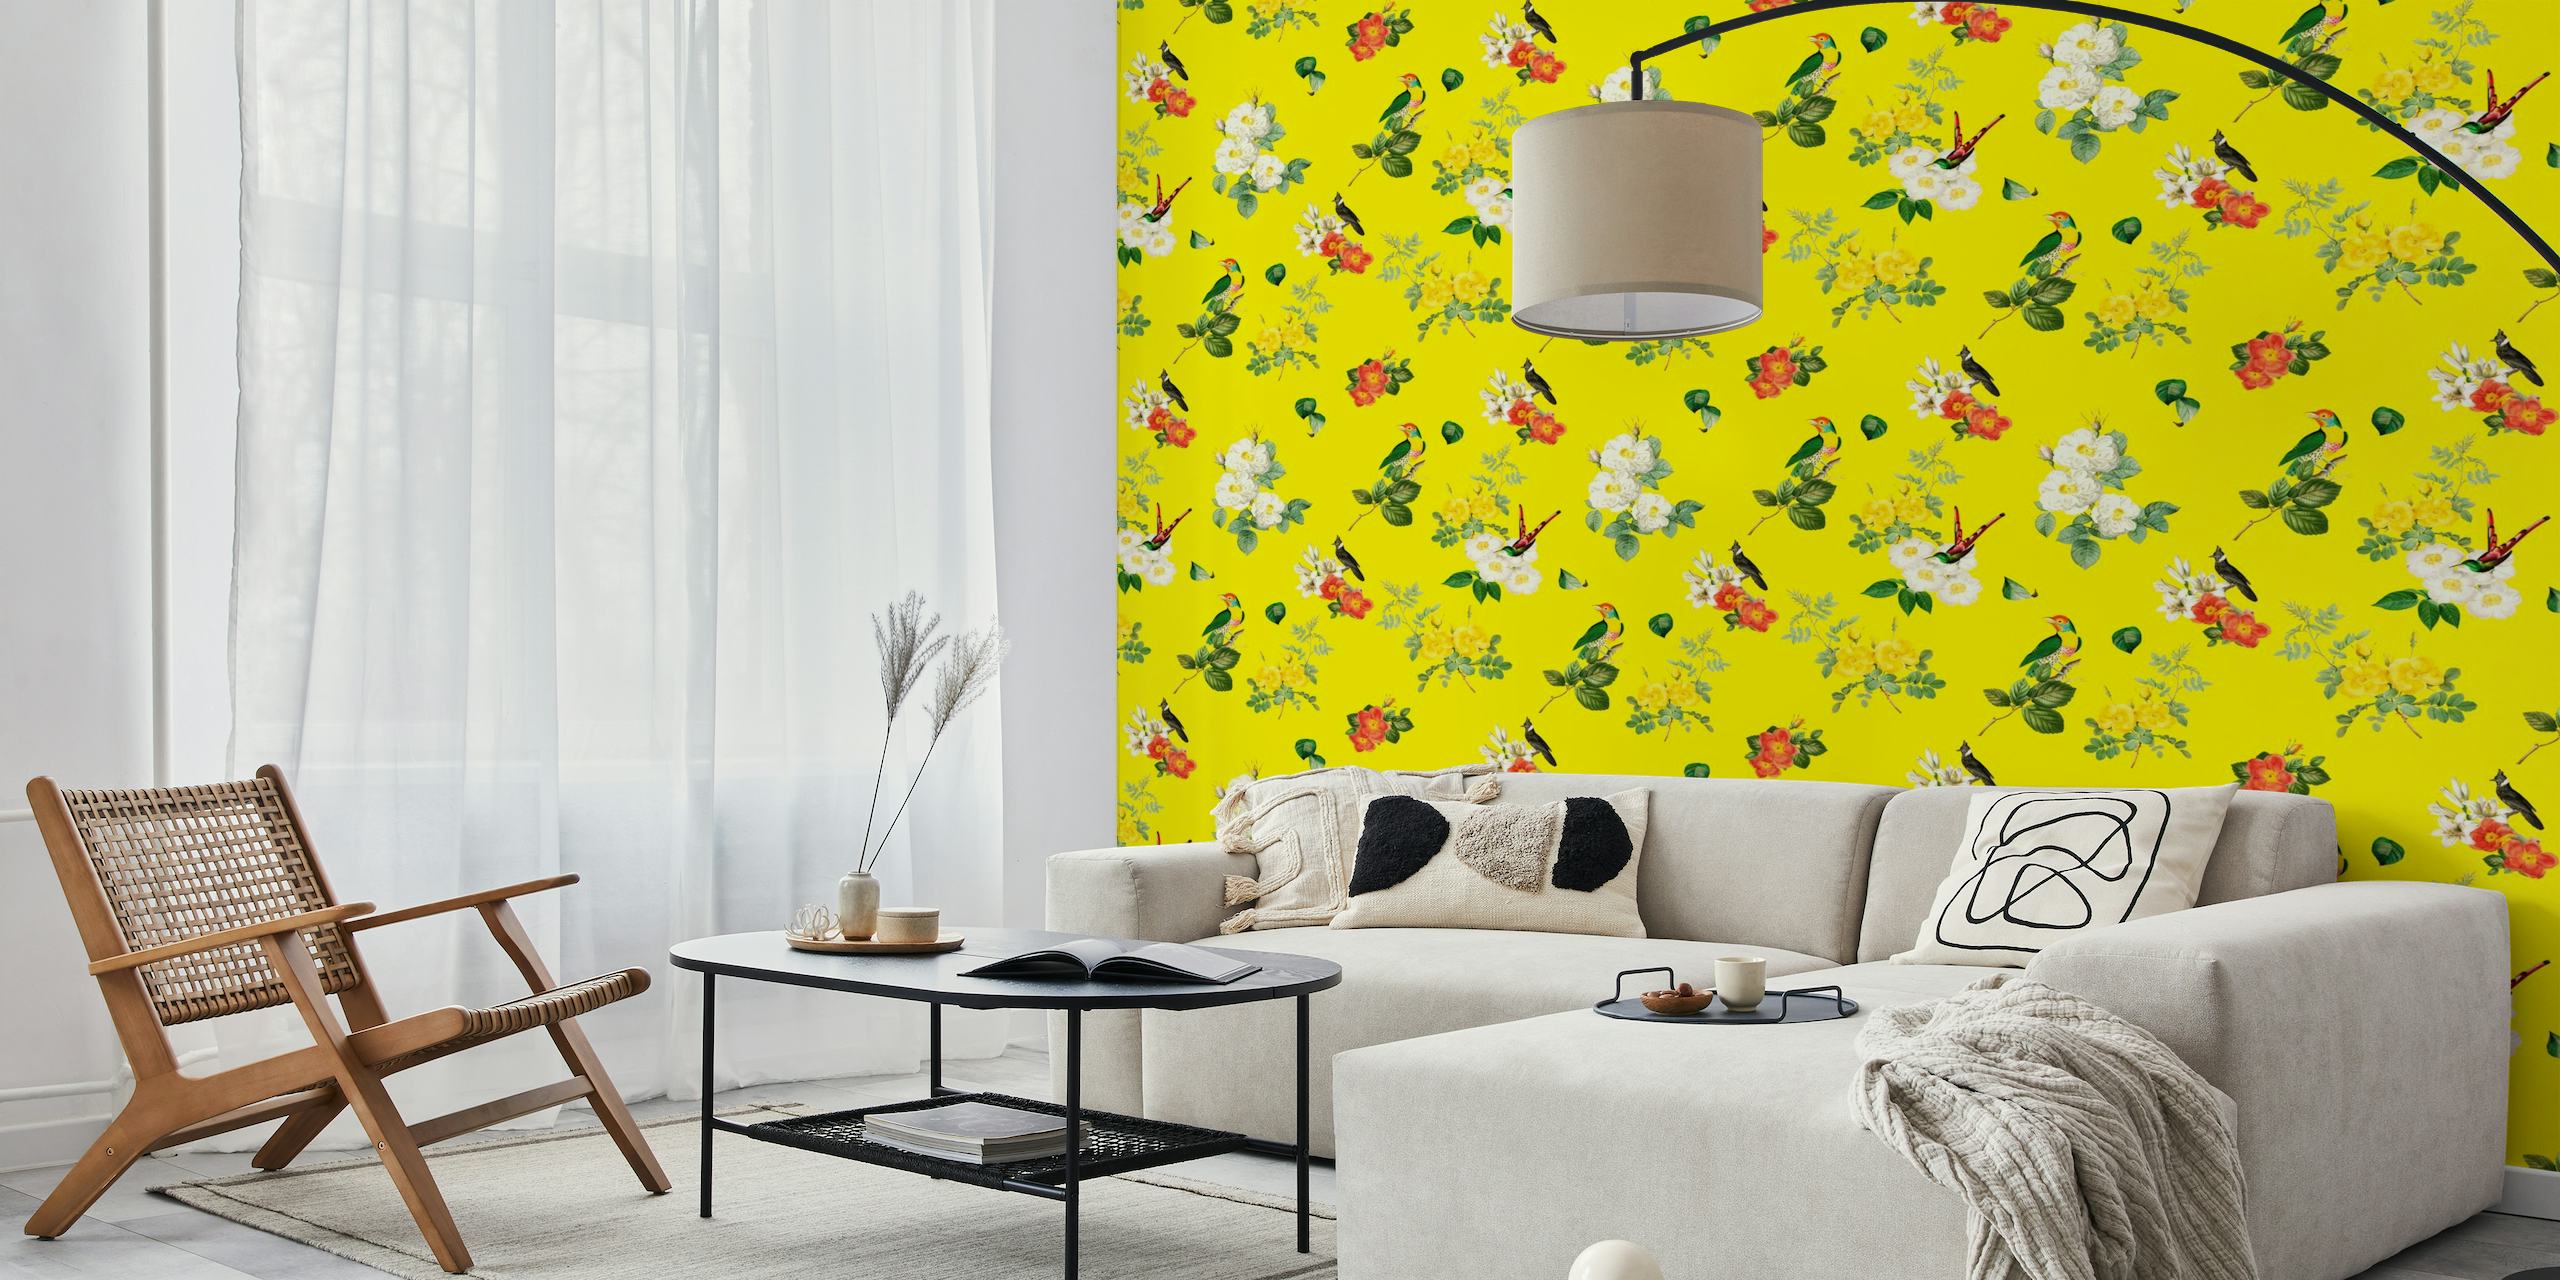 Vibrant vintage-style wall mural featuring tropical birds and floral patterns on a bold yellow background.